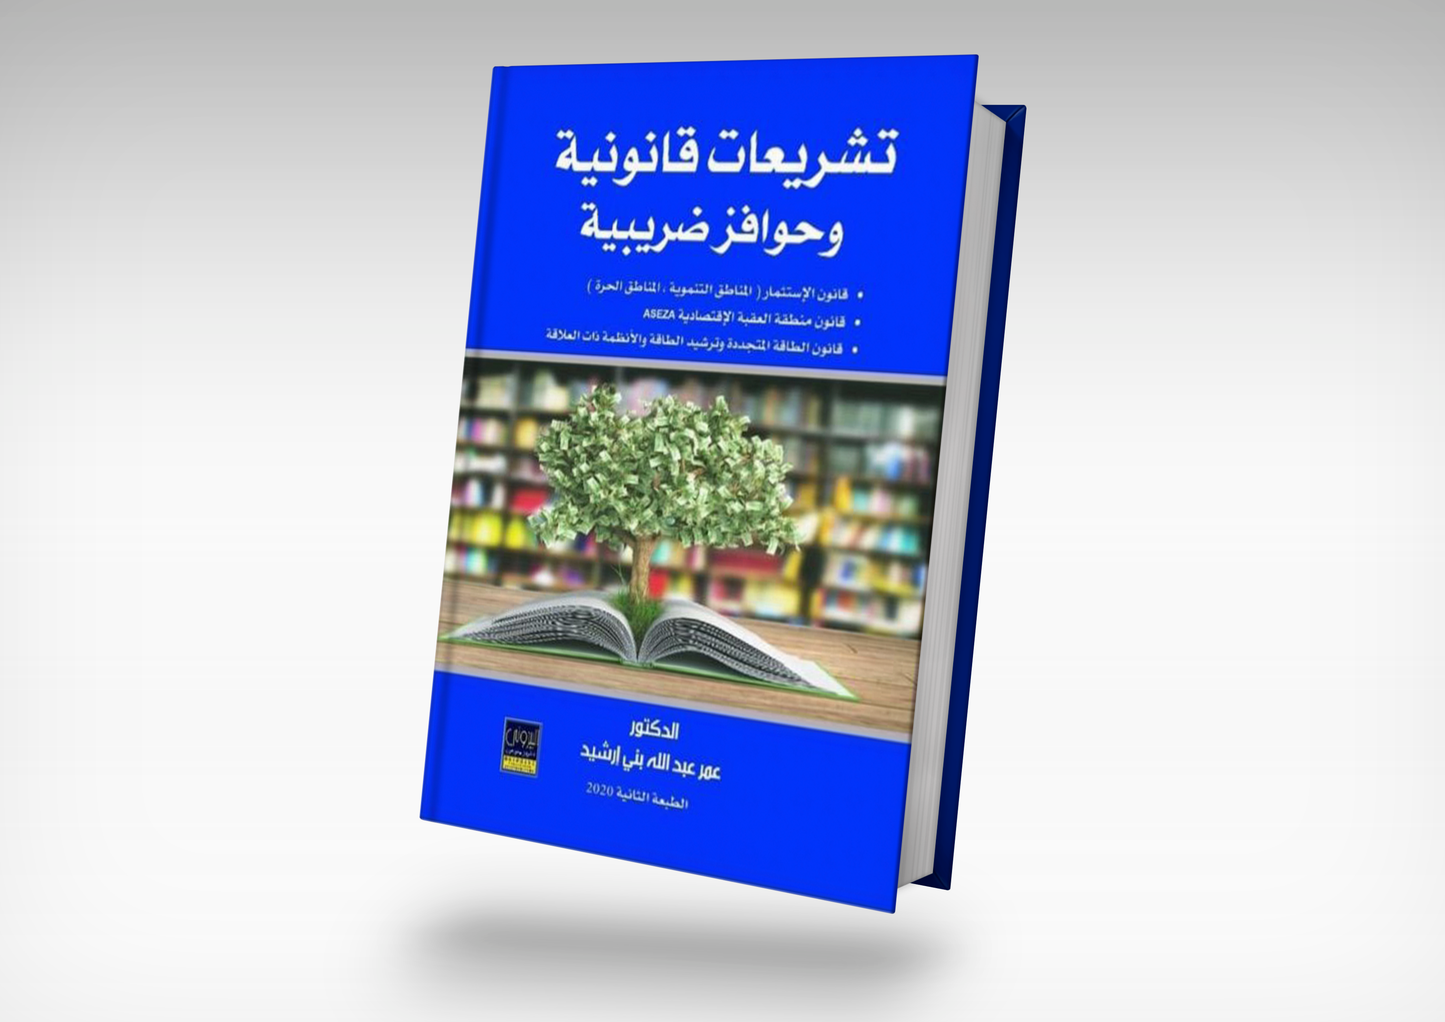 Book of legal legislation and tax incentives